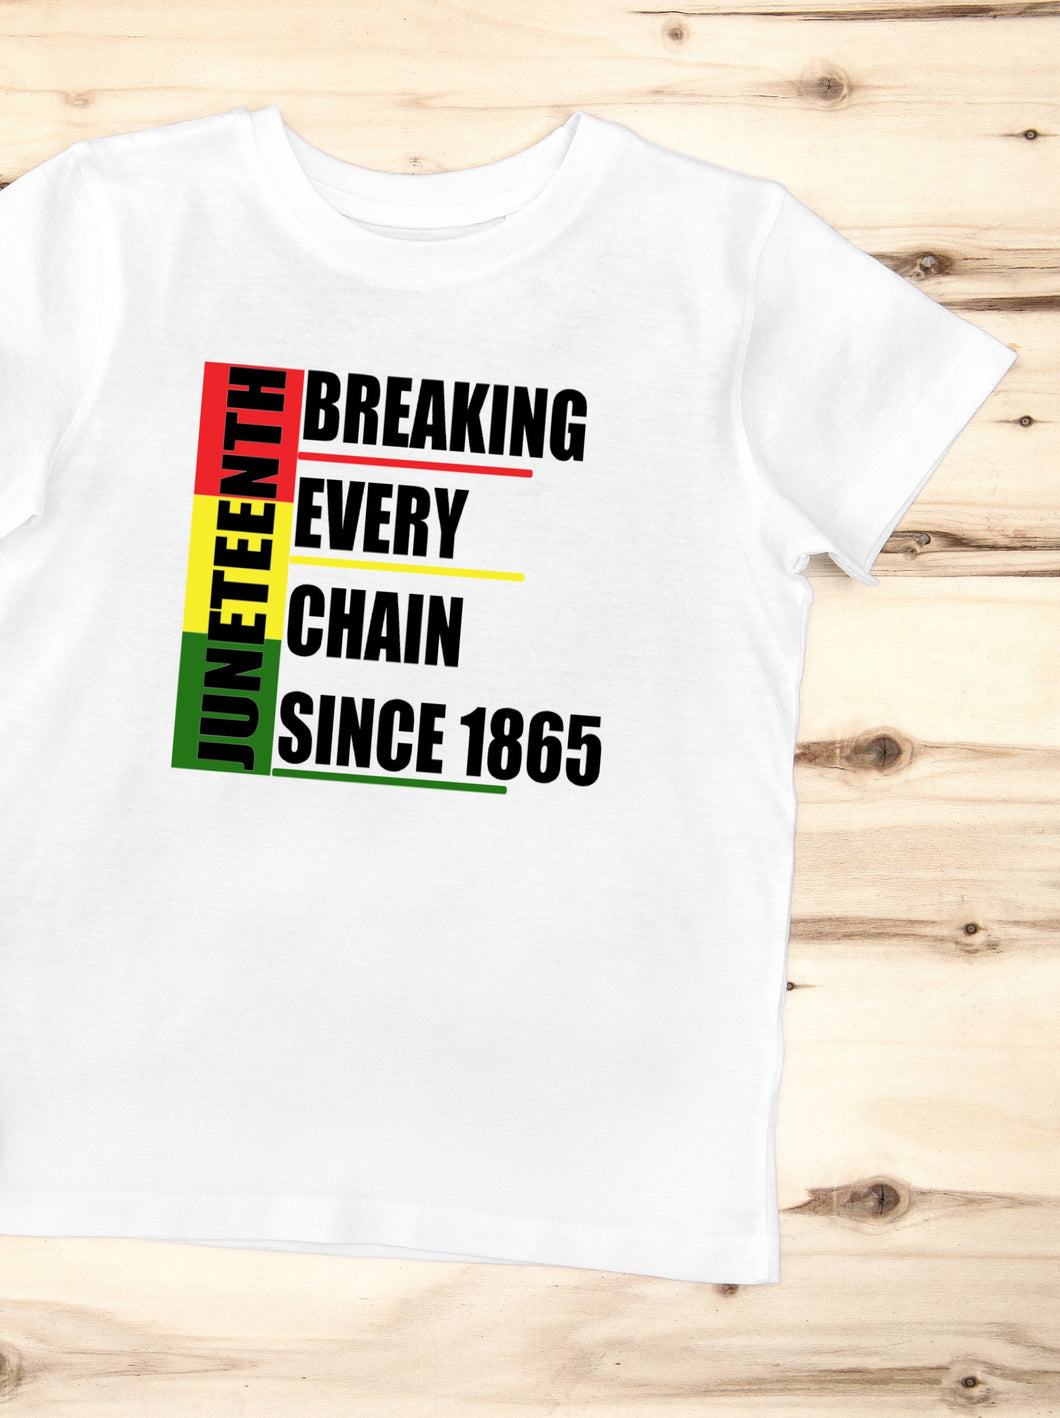 Juneteenth-Breaking Every Chain Since 1865